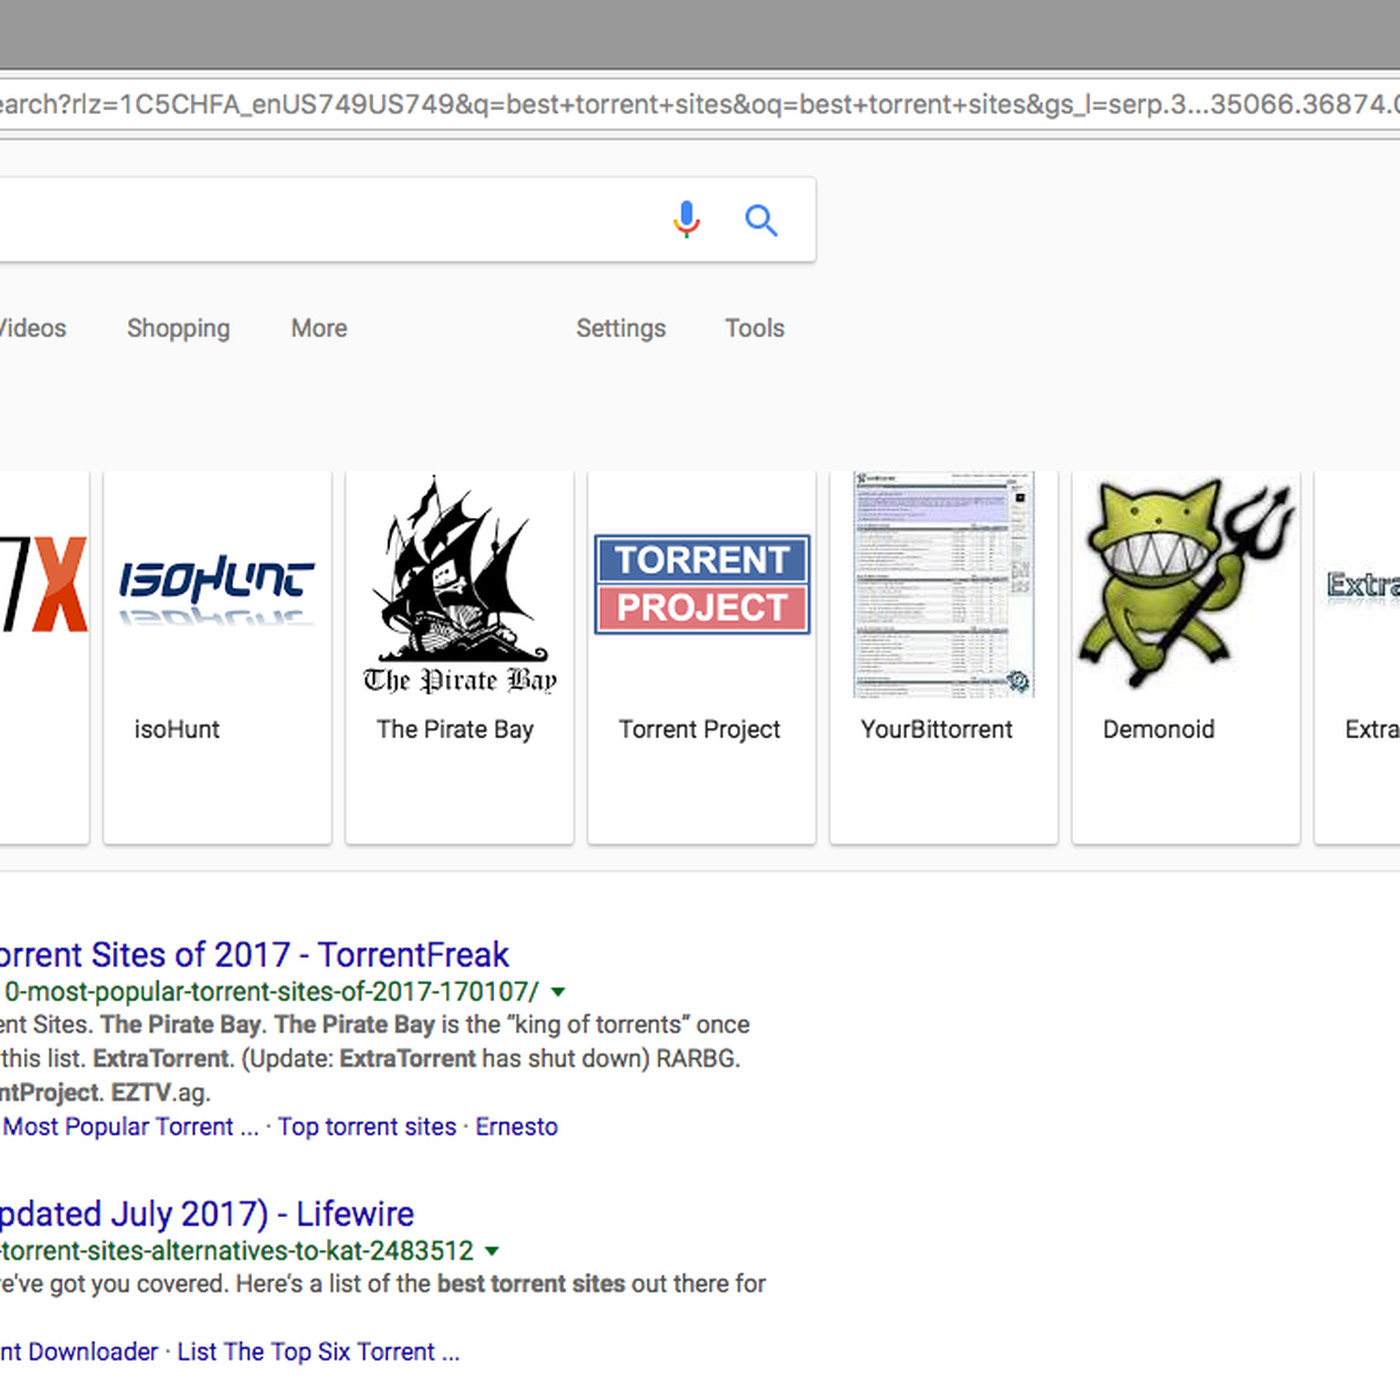 Google now casually highlights 'best torrent sites' [Updated] - The Verge